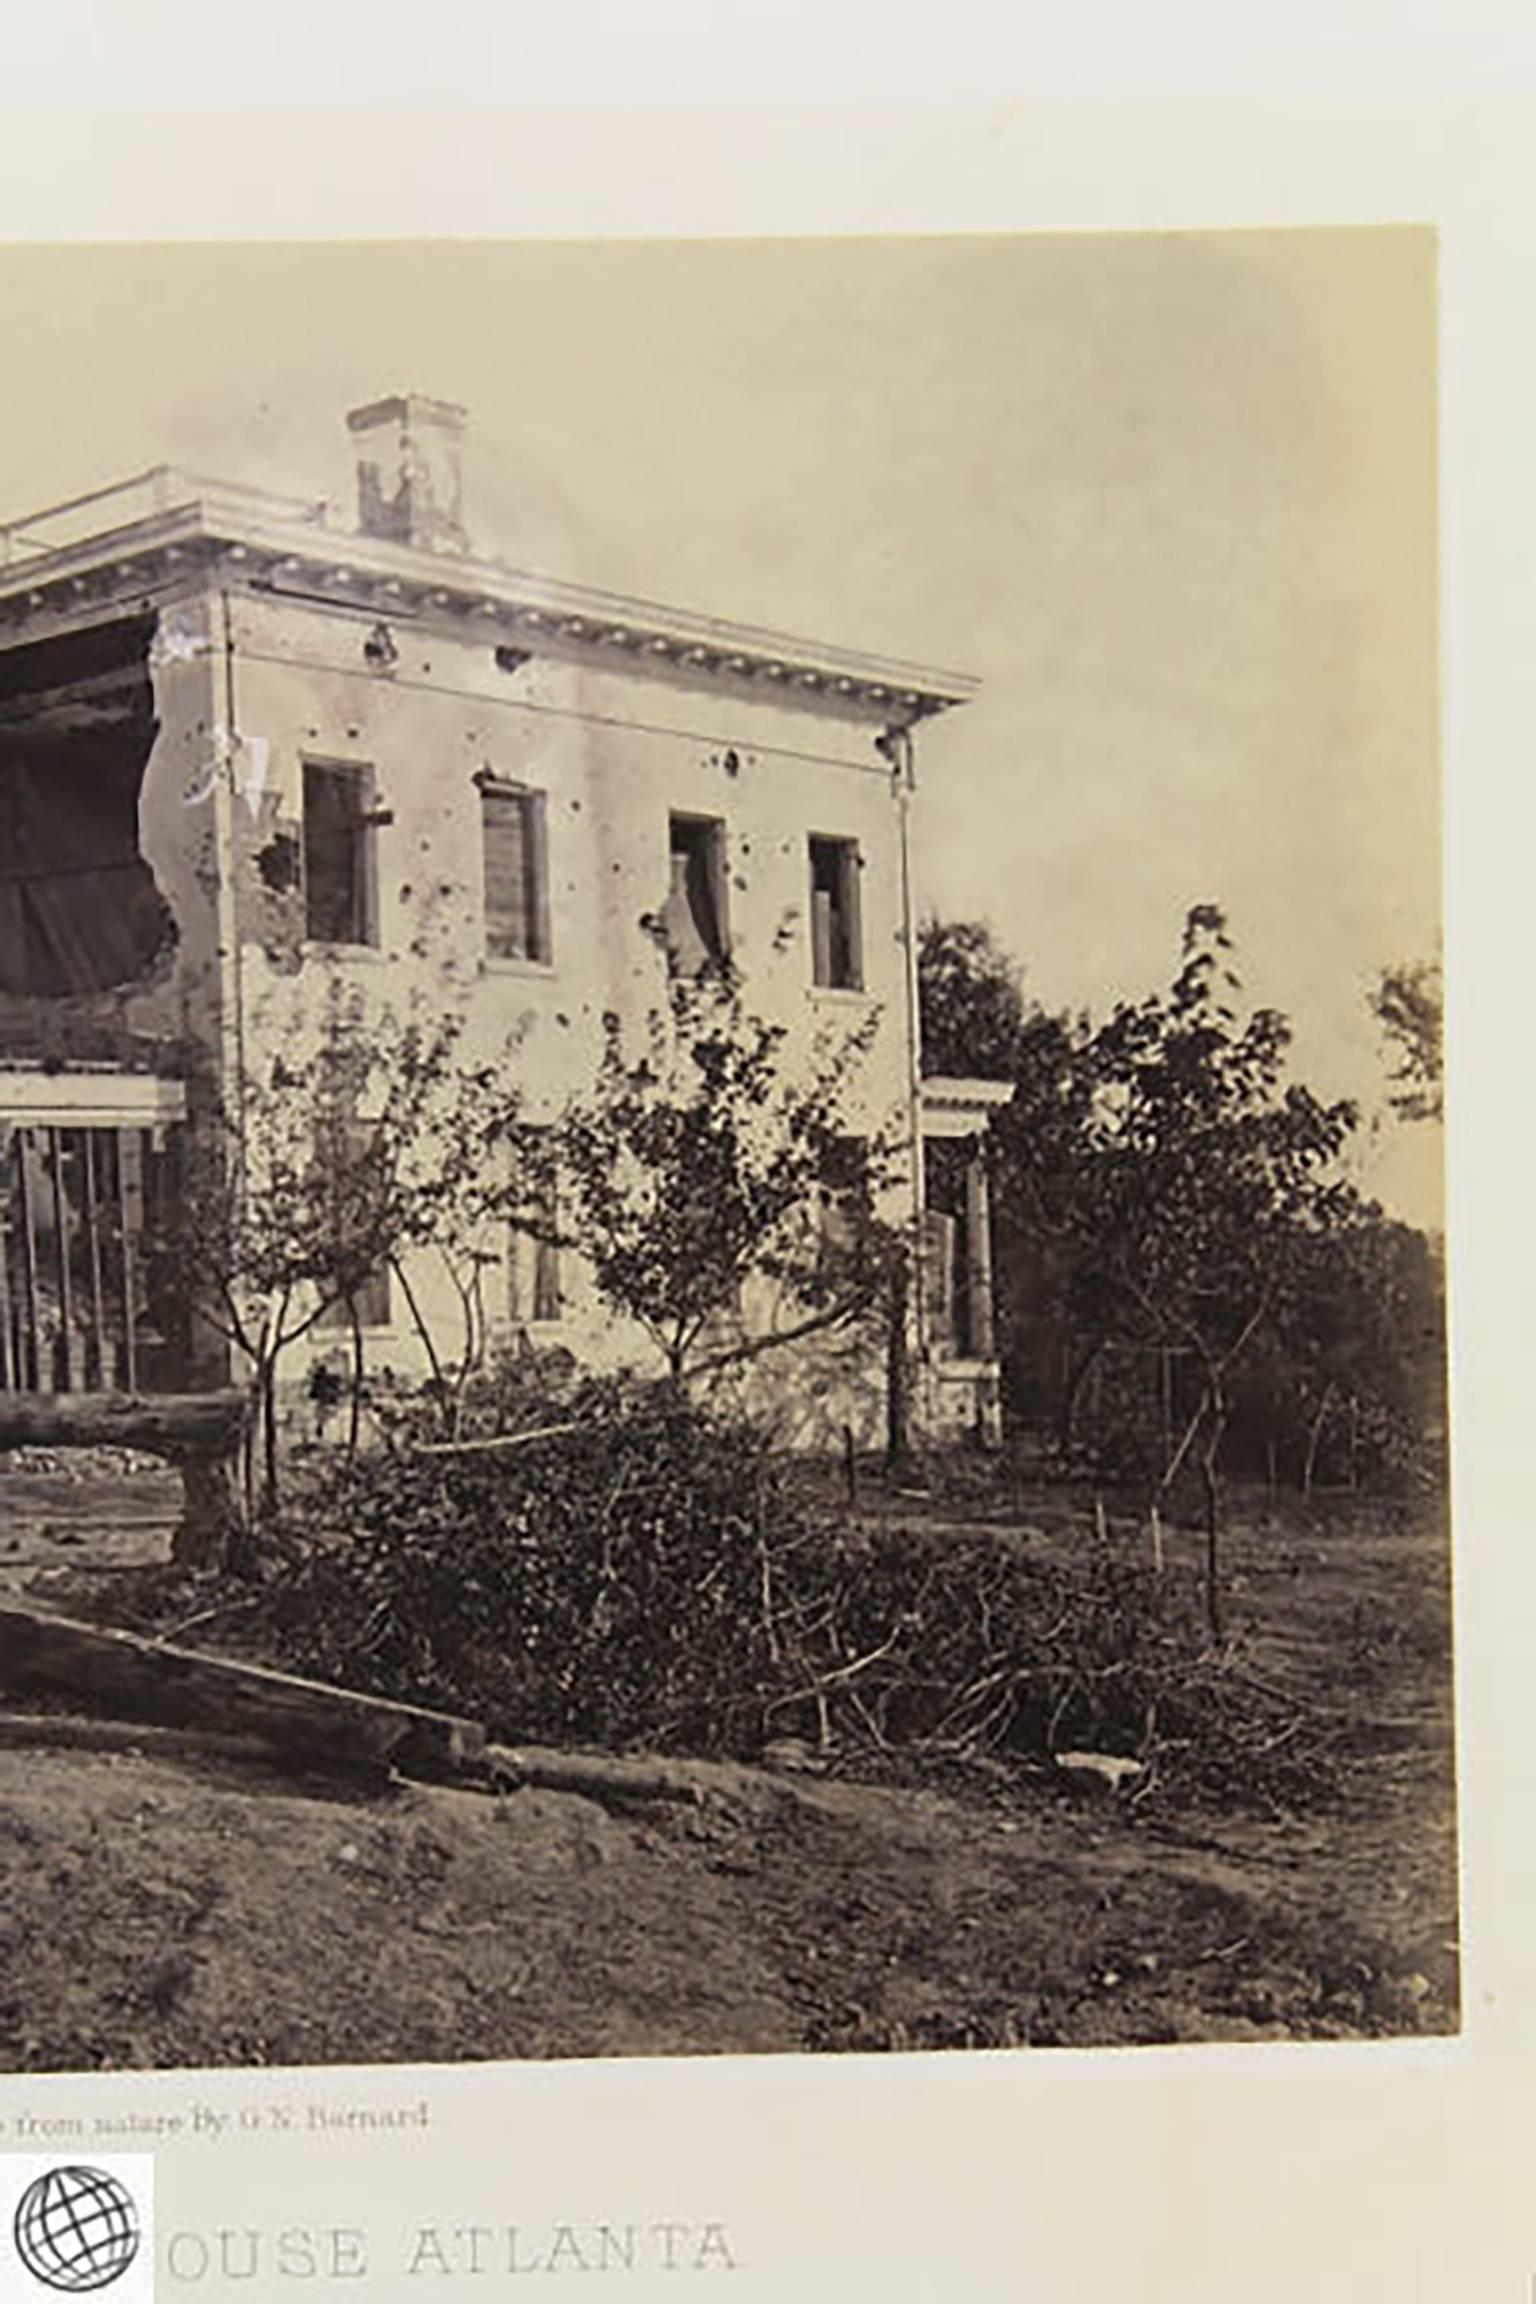 Very Rare Original Civil War Photograph by George N. Barnard (1819-1902). Entitled: The Potter House Atlanta [New York: 1866]. Albumen photograph from a negative taken in 1866, on original two-tone gilt-edged thin card mount, with plate title and